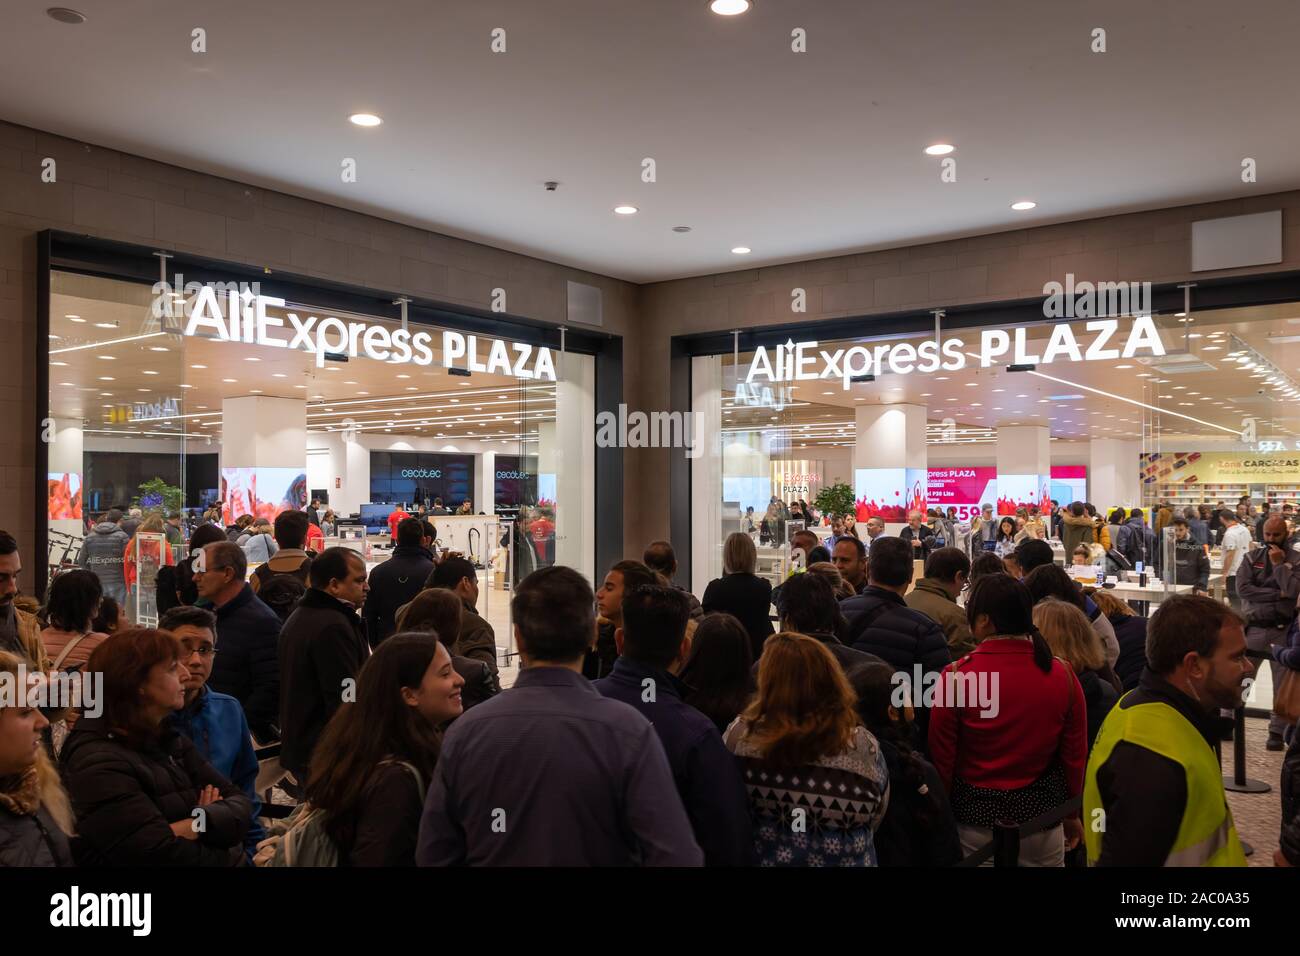 Barcelona, Spain - Nov 29, 2019: Aliexpress Plaza physical store Grand  Opening during Black Friday in the shopping center Finestrelles Stock Photo  - Alamy